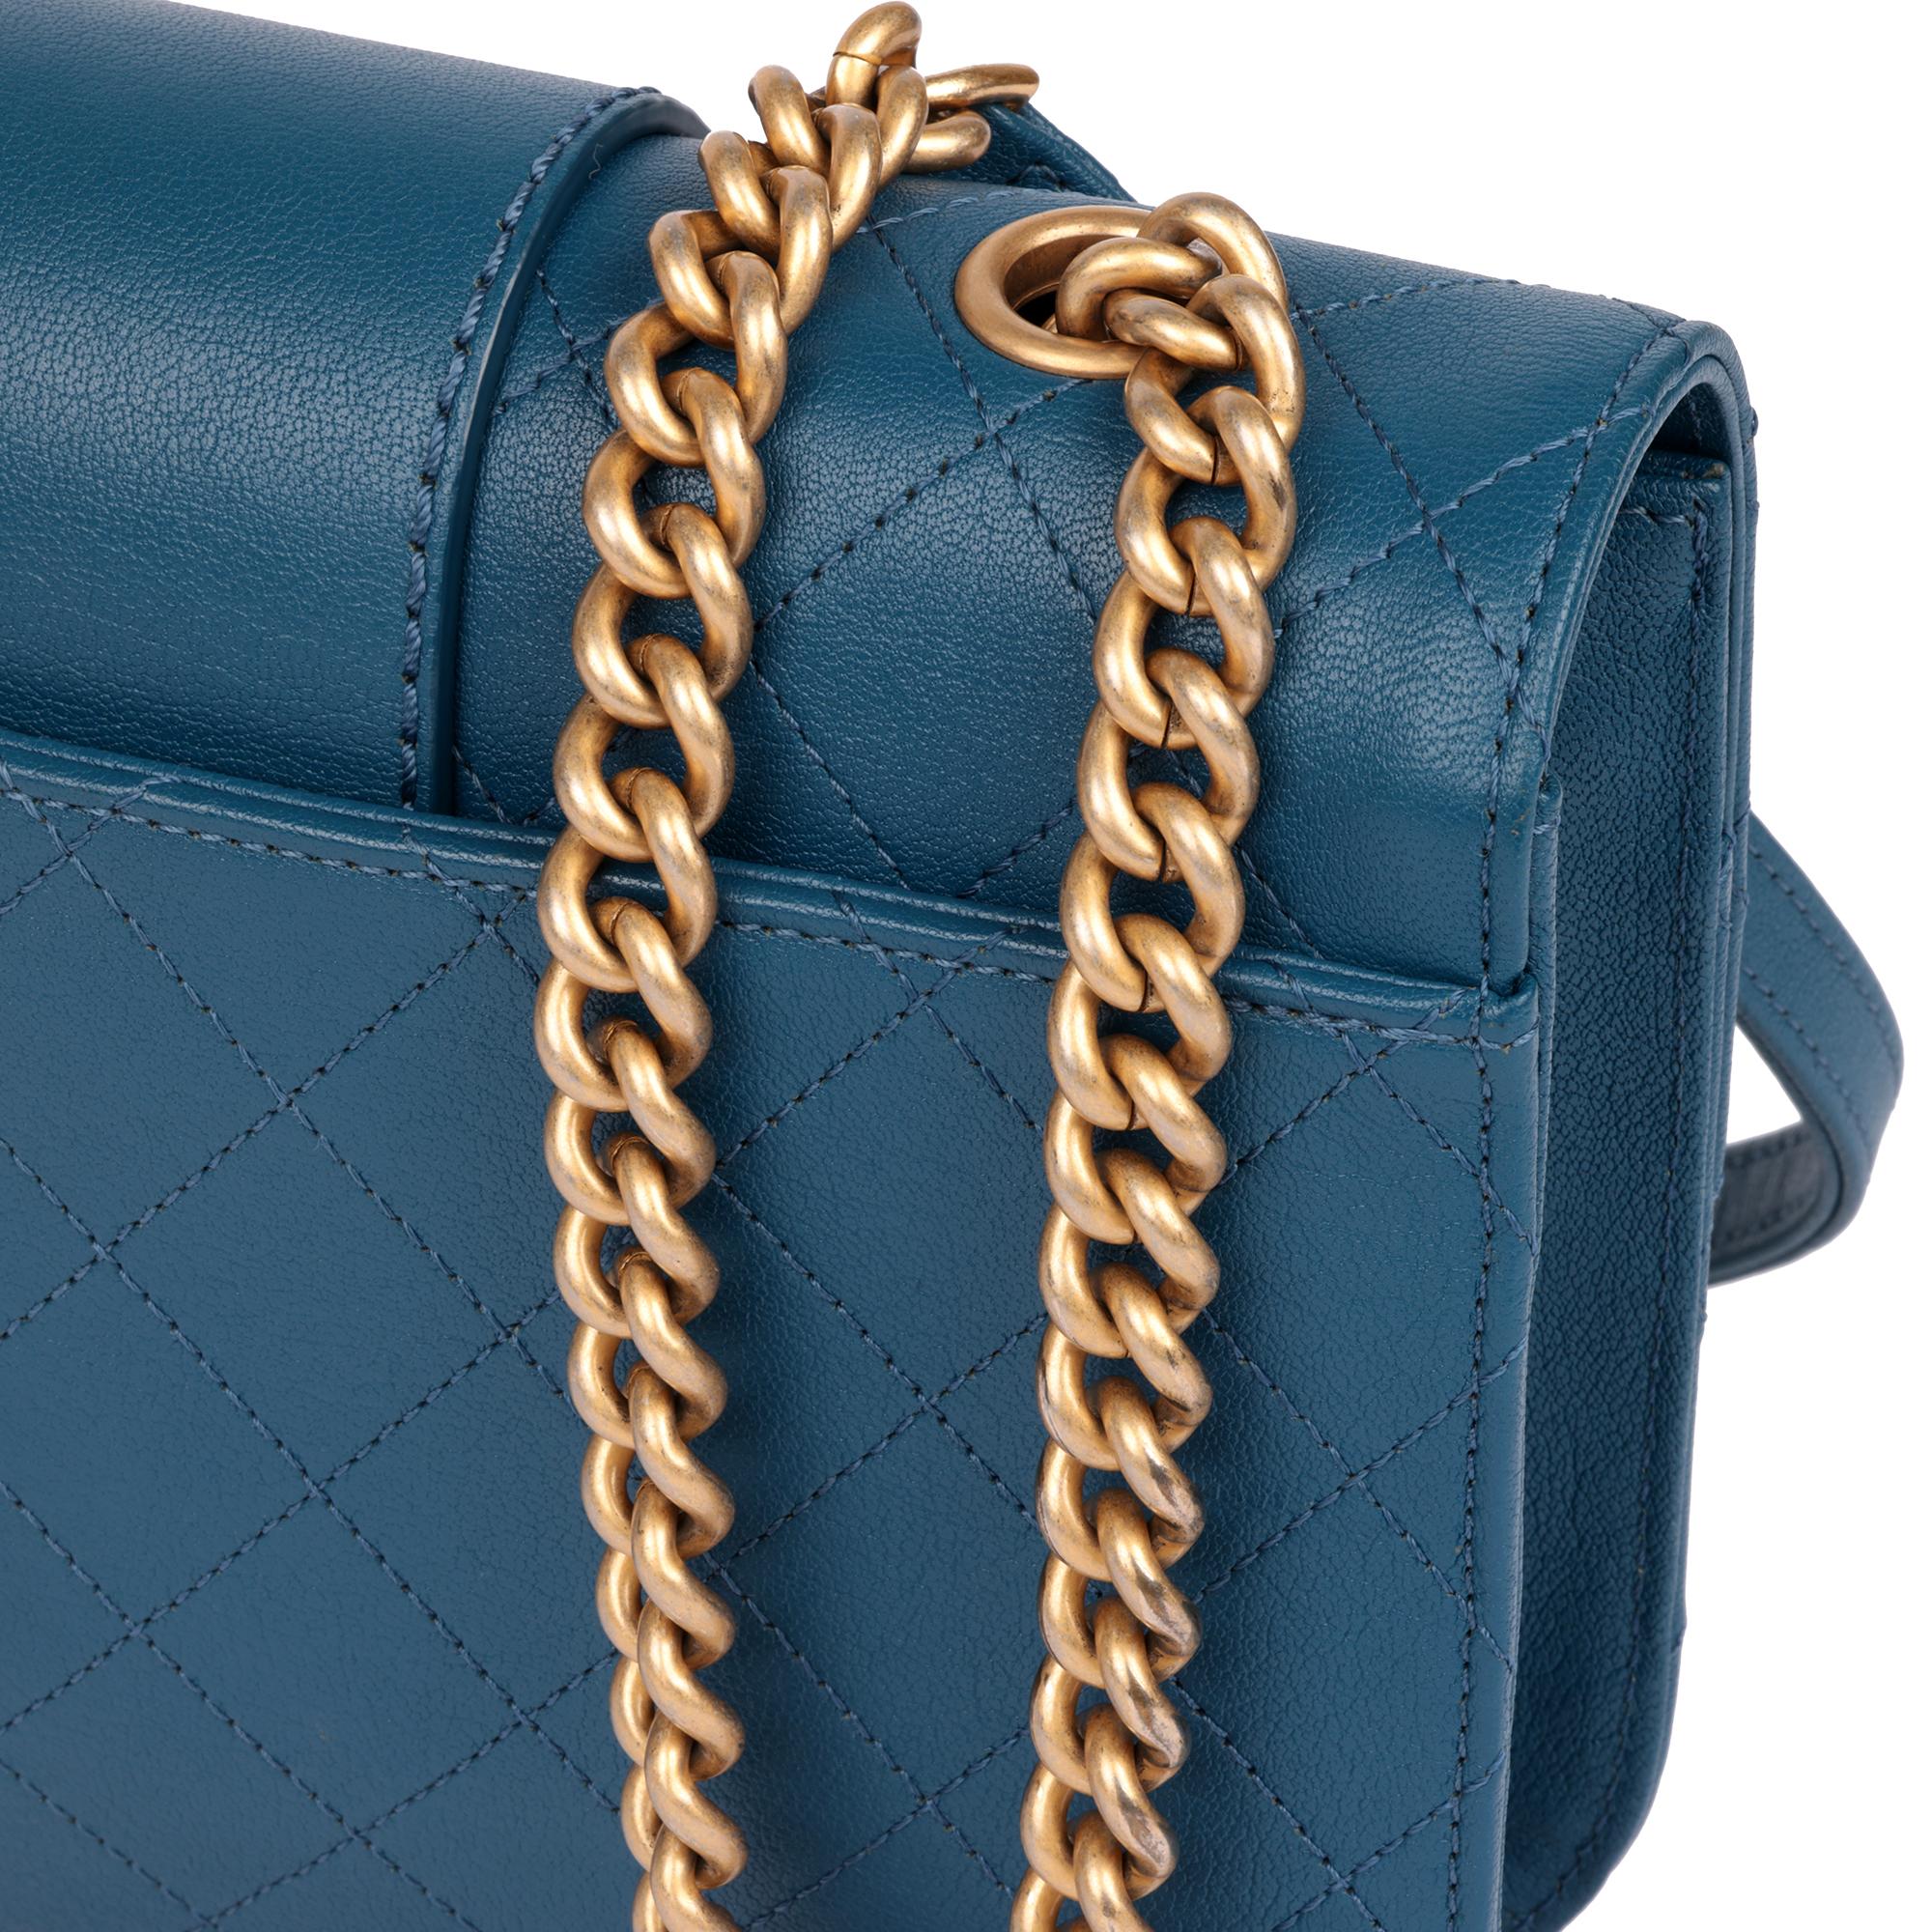 CHANEL Blue Quilted Calfskin Leather Mini Chain Front Classic Single Flap Bag 4